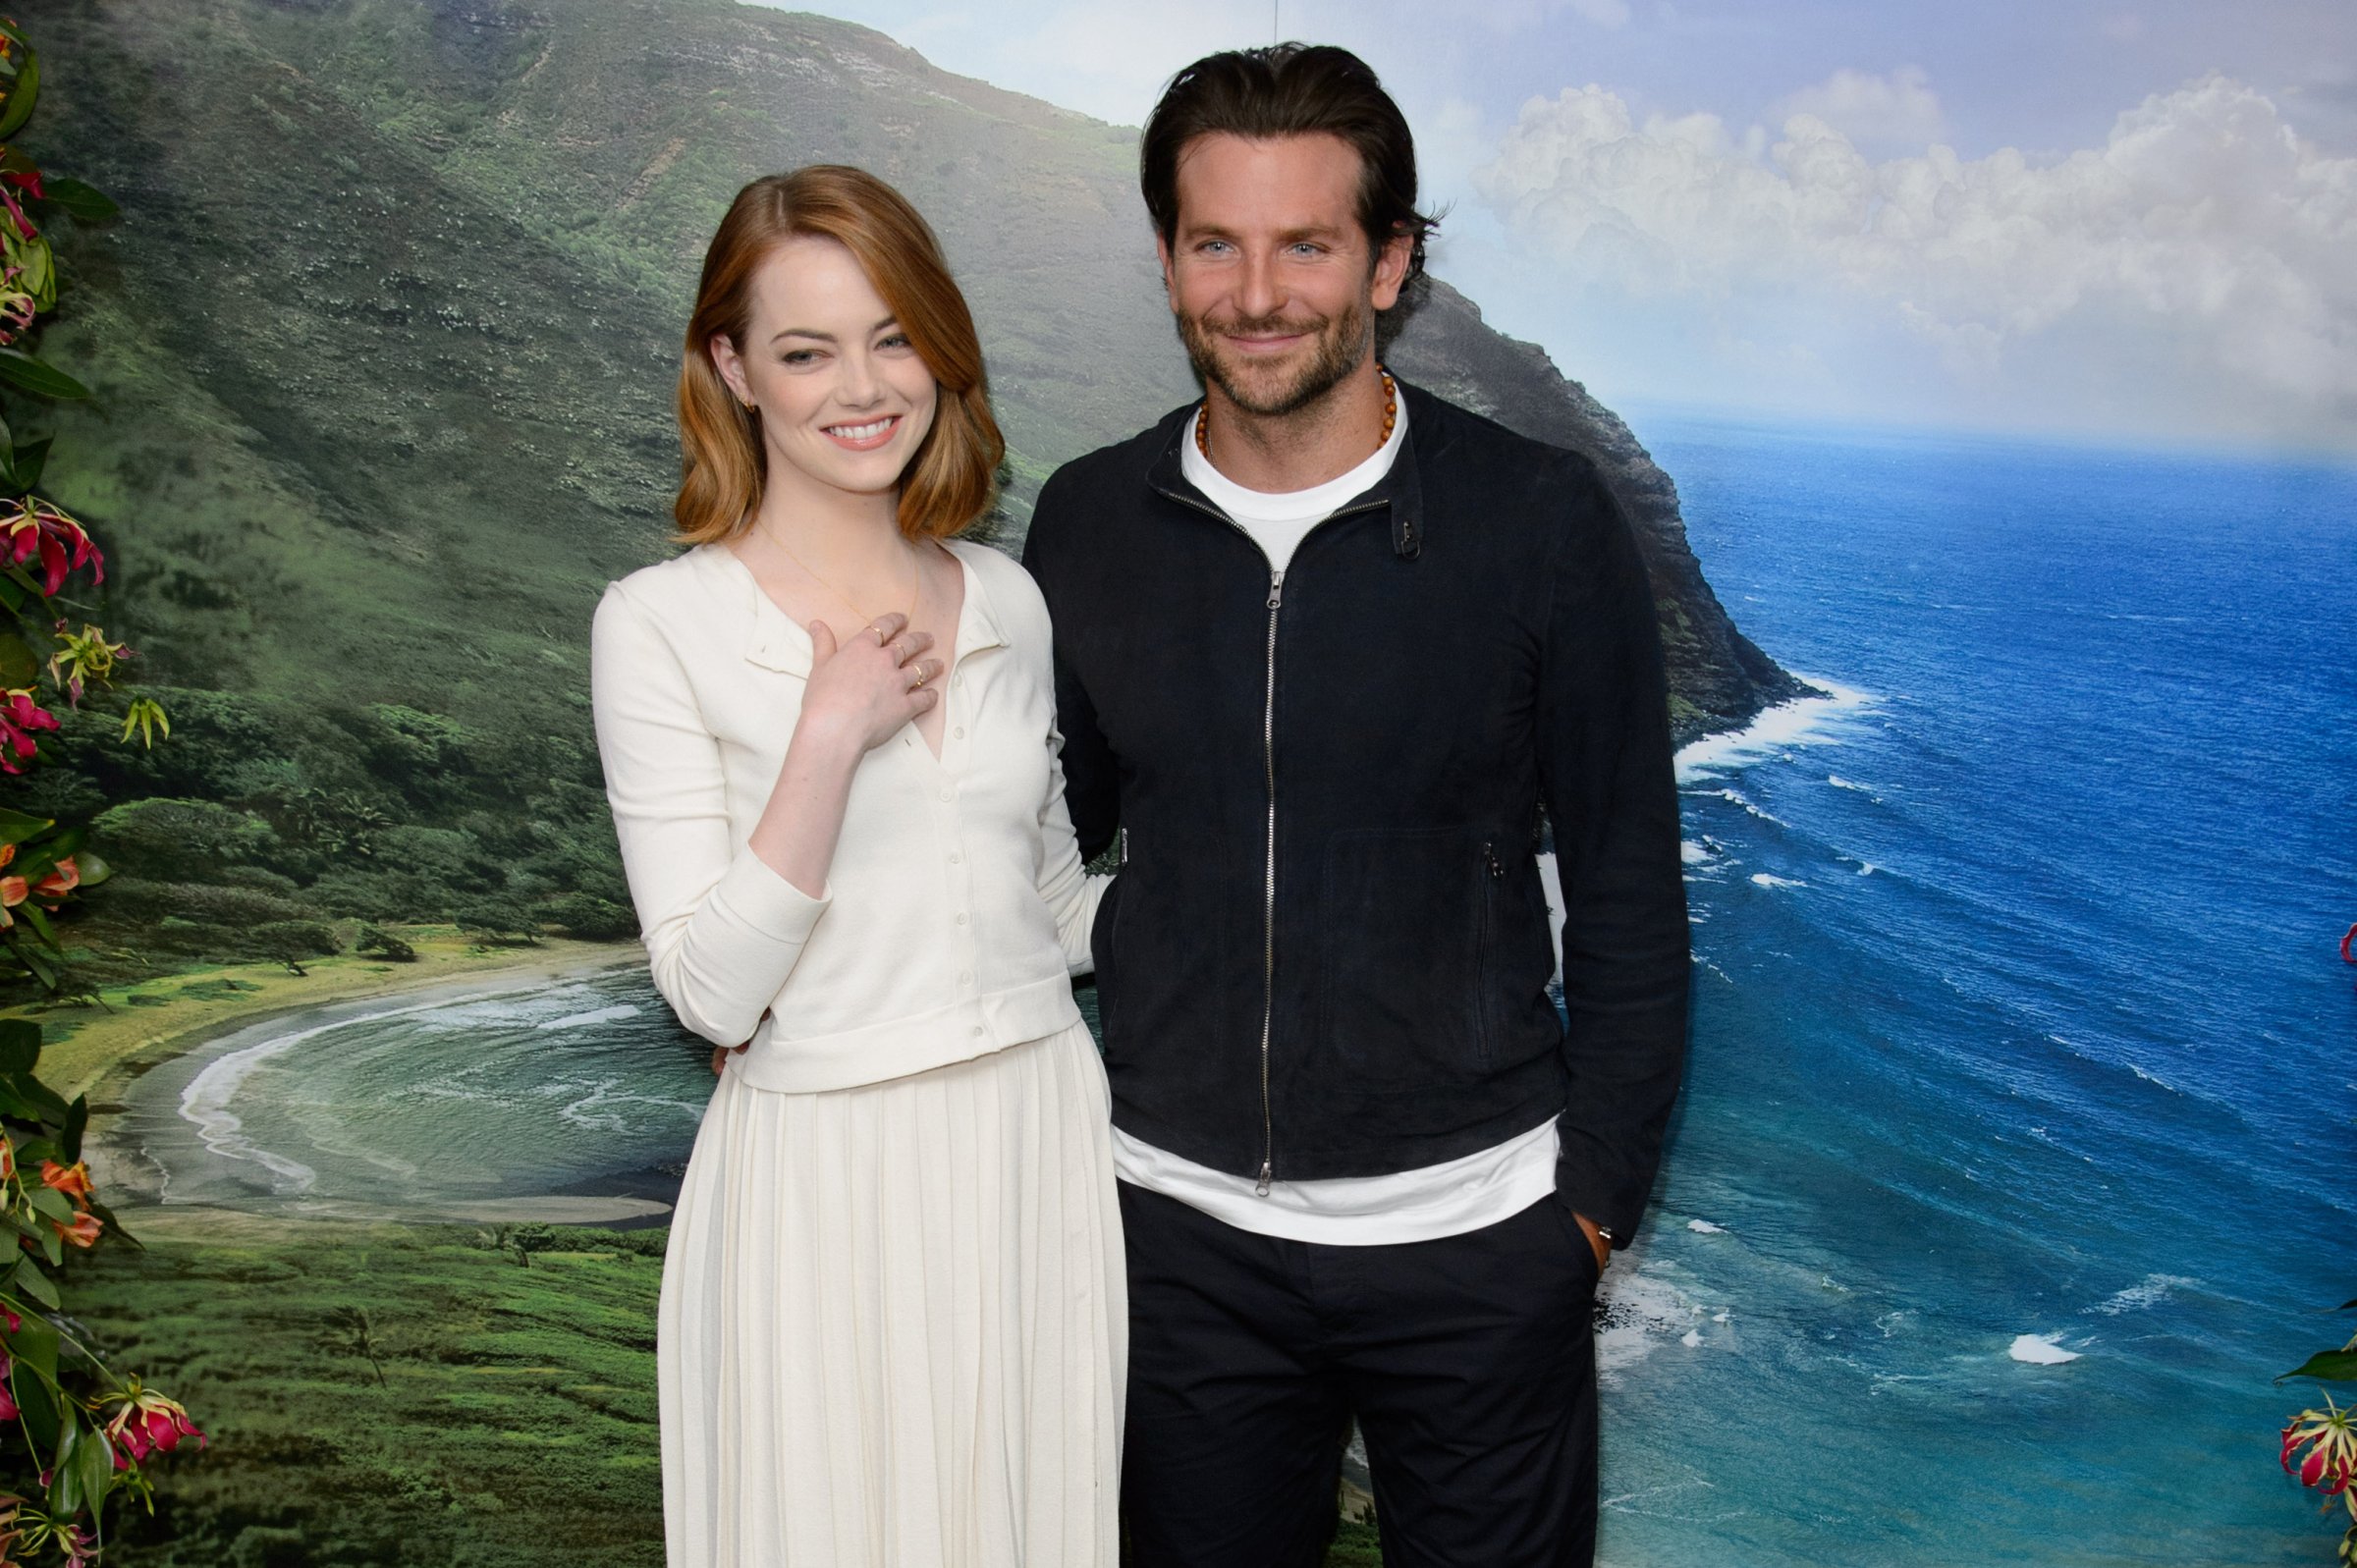 U.S actress Emma Stone and U.S actor Bradley Cooper pose for photographers at a photocall for Aloha at a central London venue